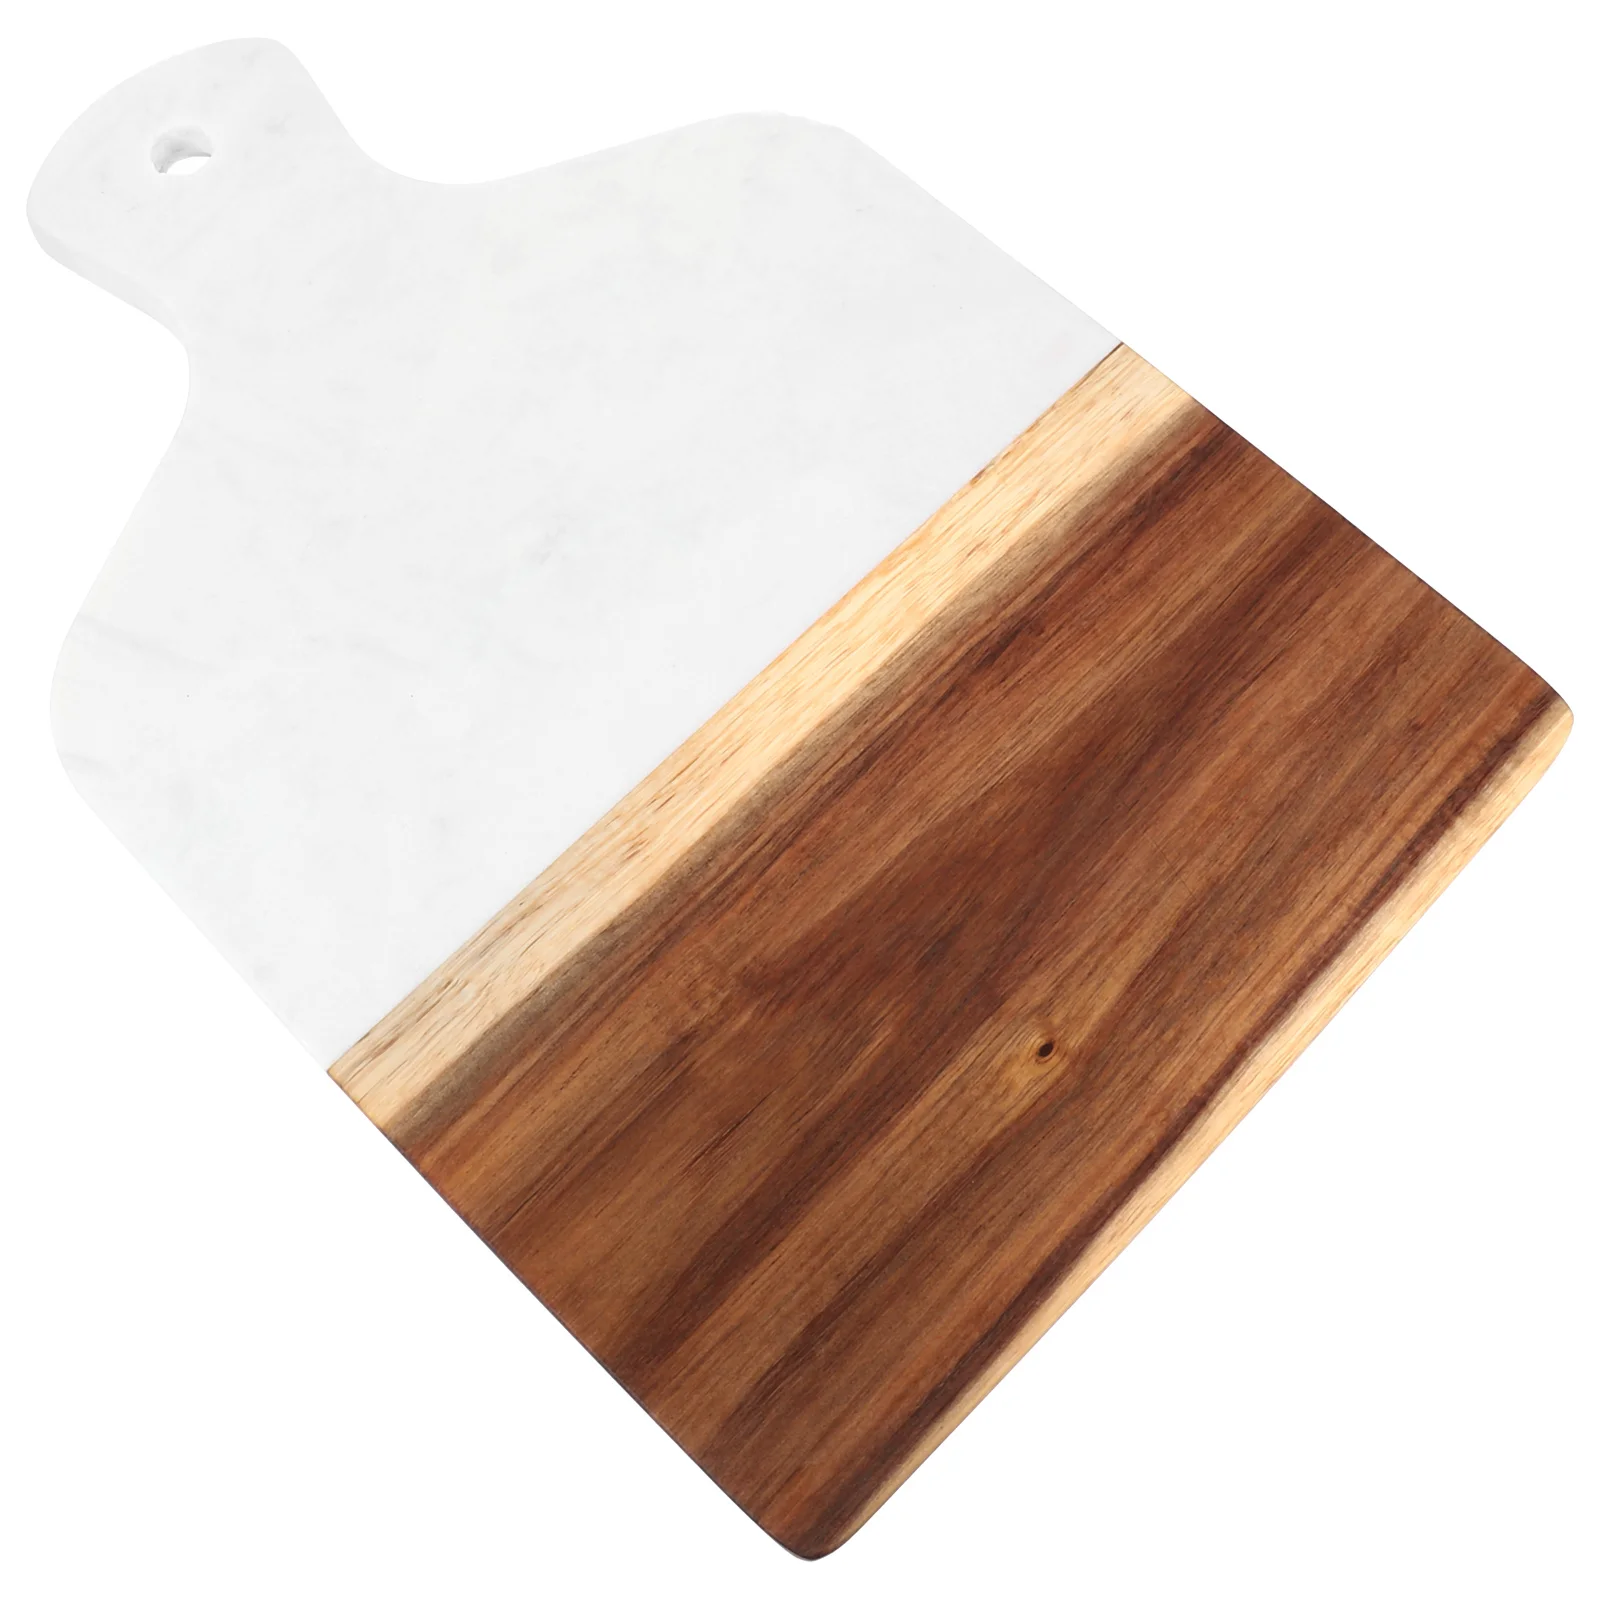 

Household Chopping Board Tabletop Wood Serving Plate Wooden Marble Cutting Board Steak Serving Plate